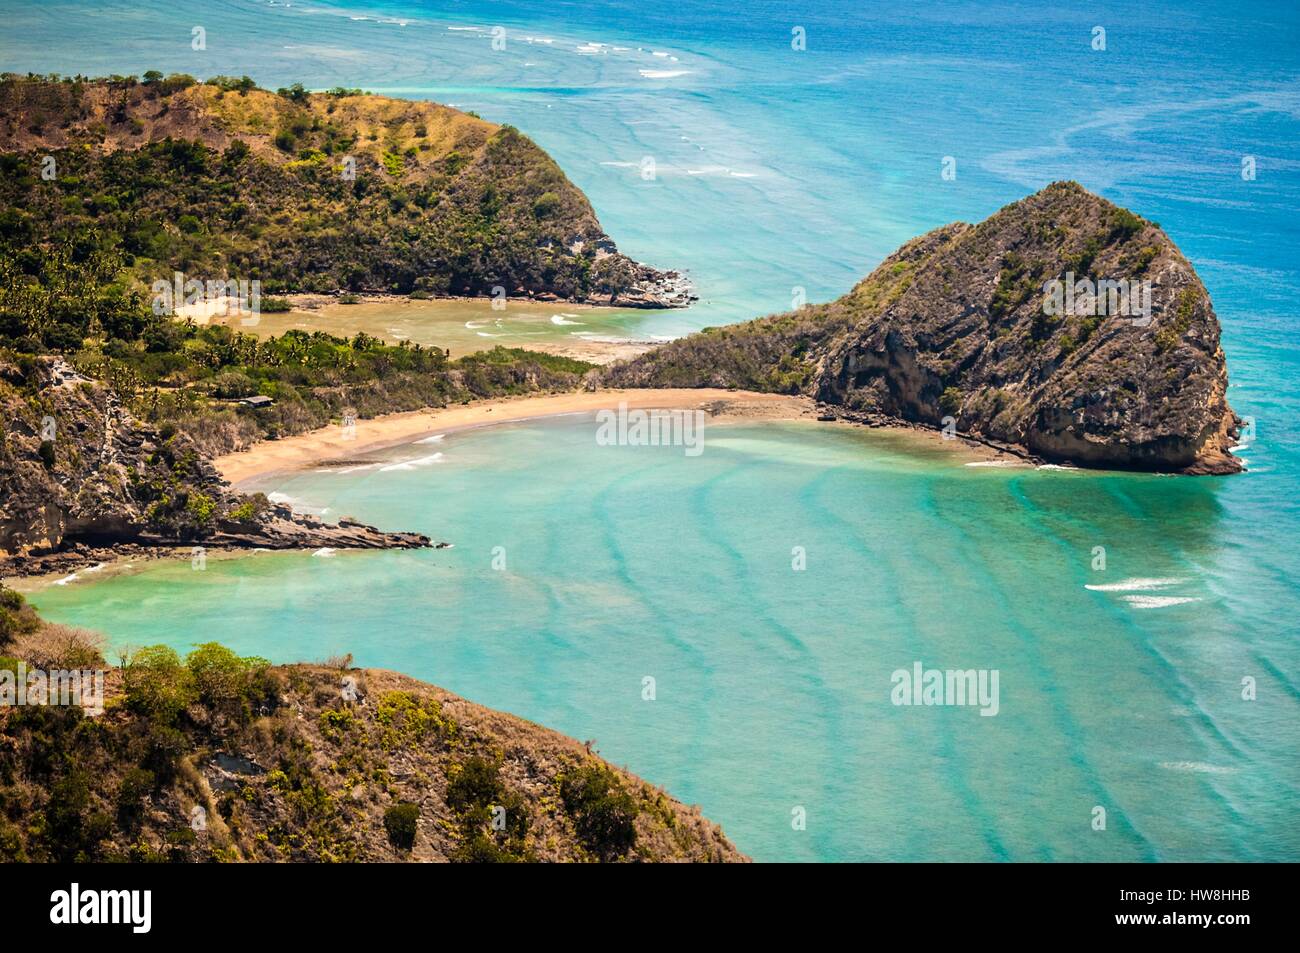 France, Mayotte island (French overseas department), Petite Terre, Labattoir, the beaches of Moya (aerial view) Stock Photo